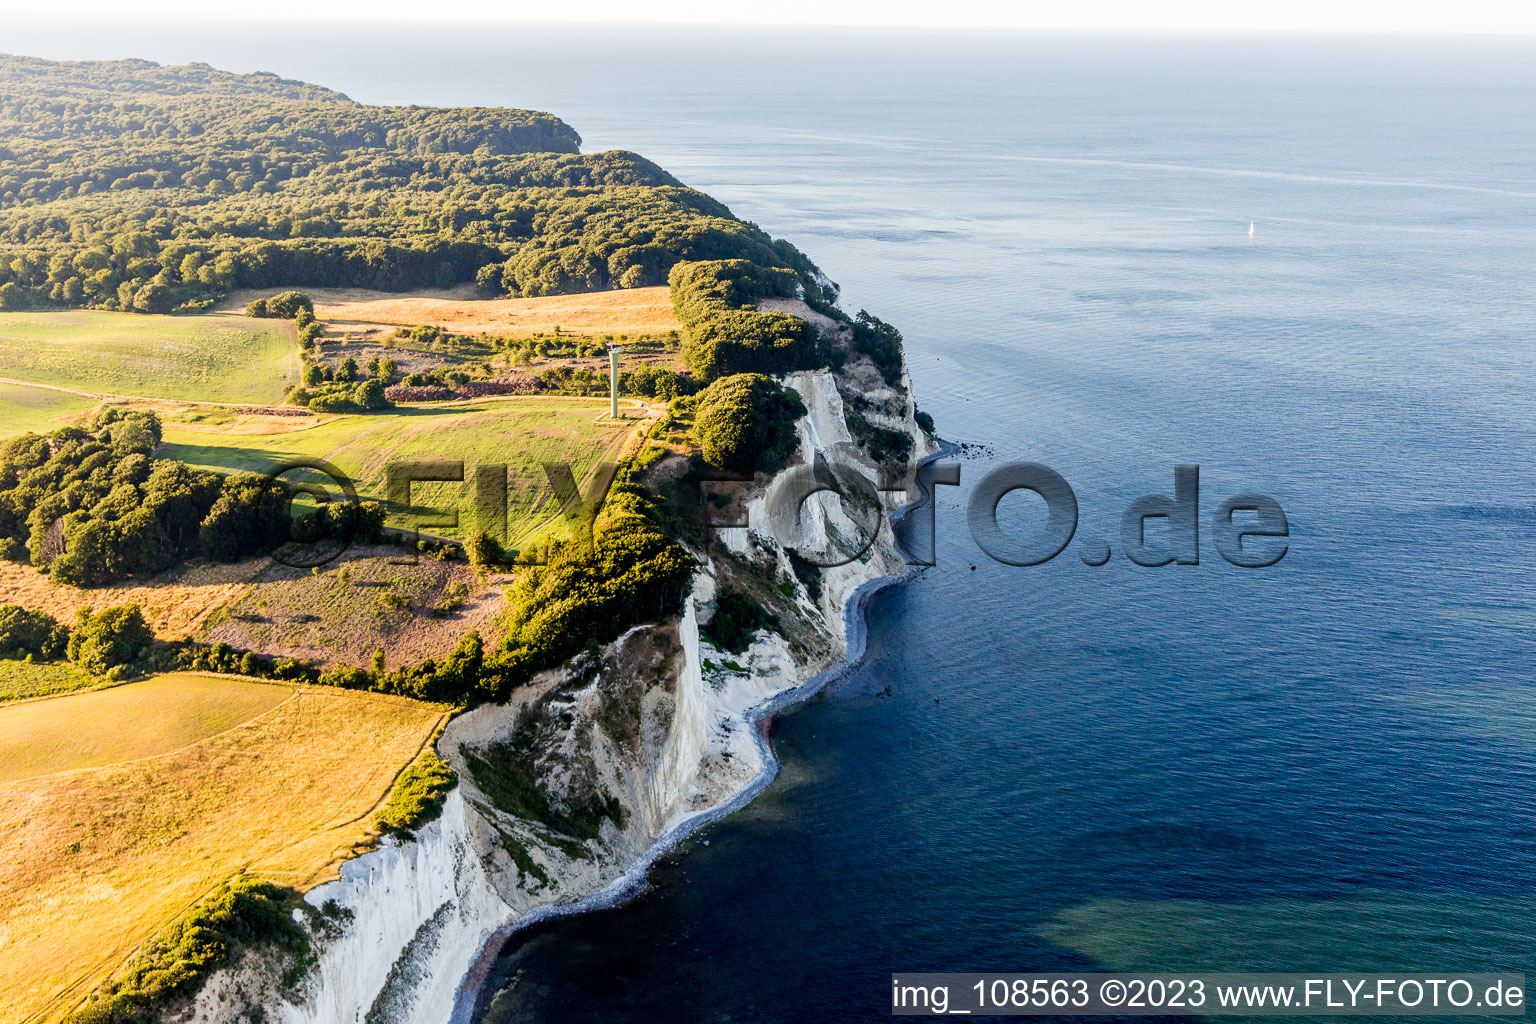 Borre in the state Zealand, Denmark viewn from the air